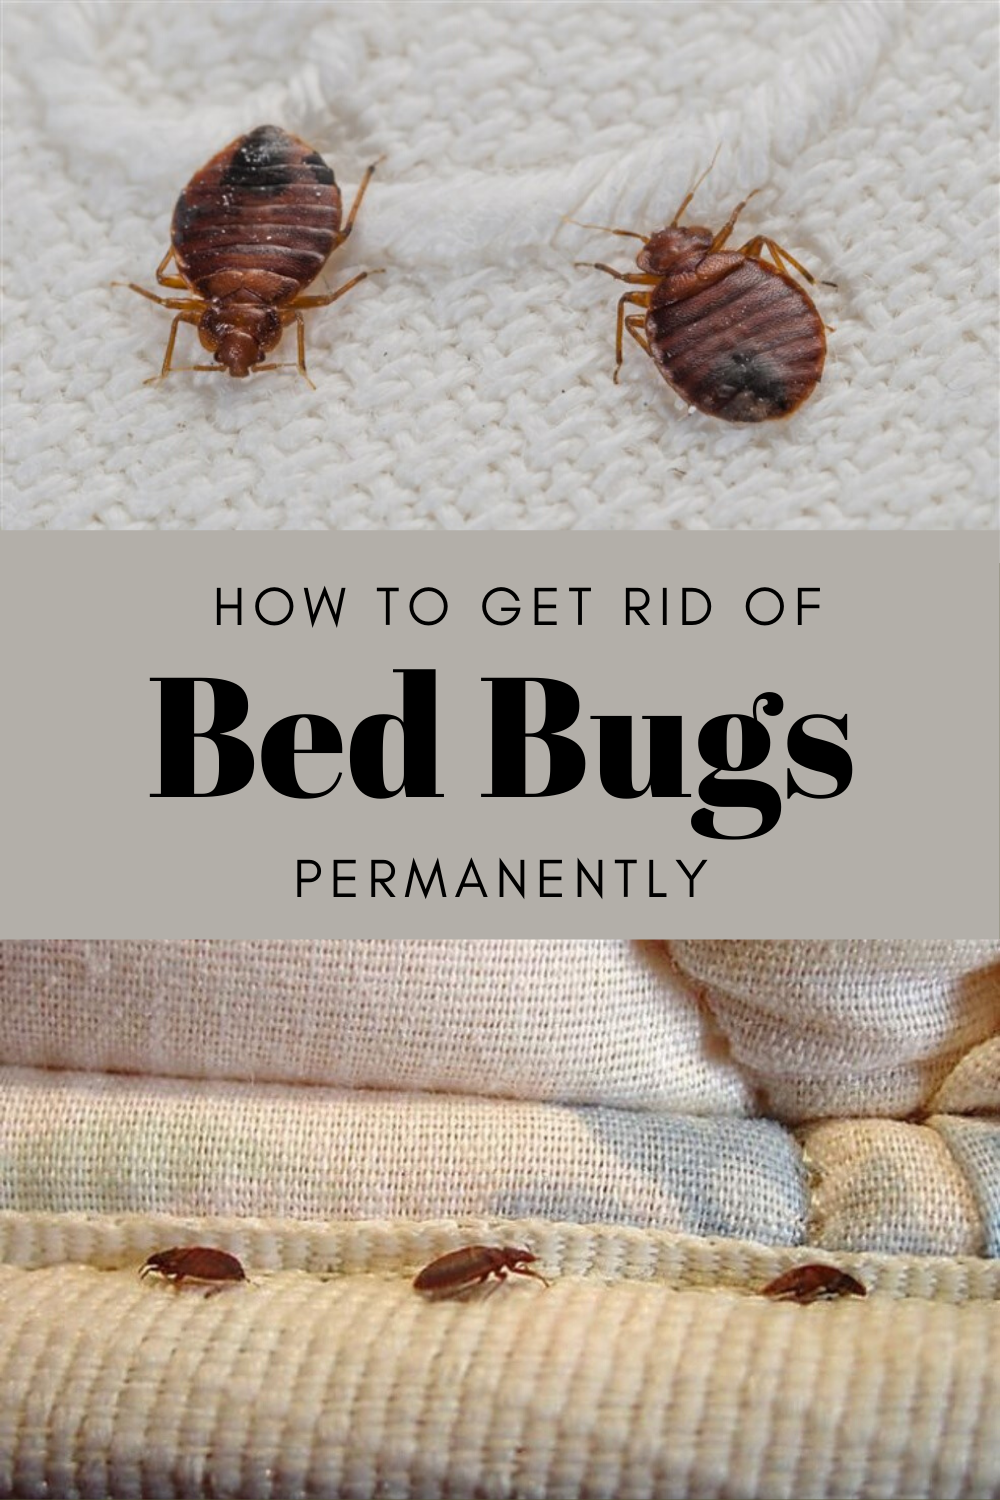 How To Get Rid Of Bed Bugs Permanently ...